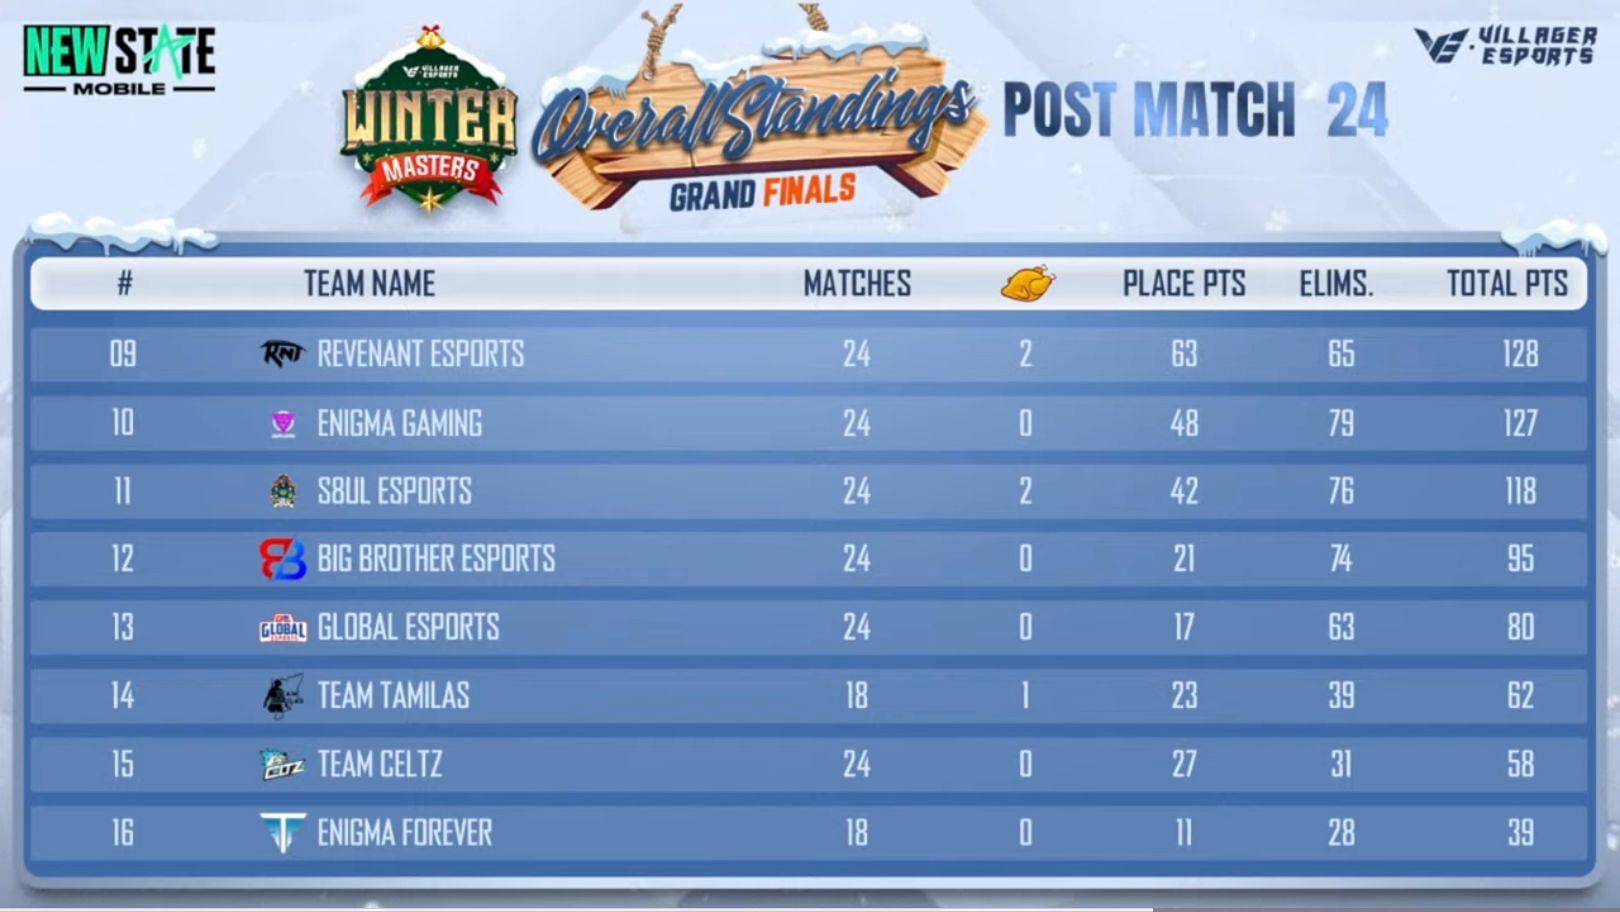 S8UL ranked 11th in PUBG New State Winter Masters (Image via Villager Esports)